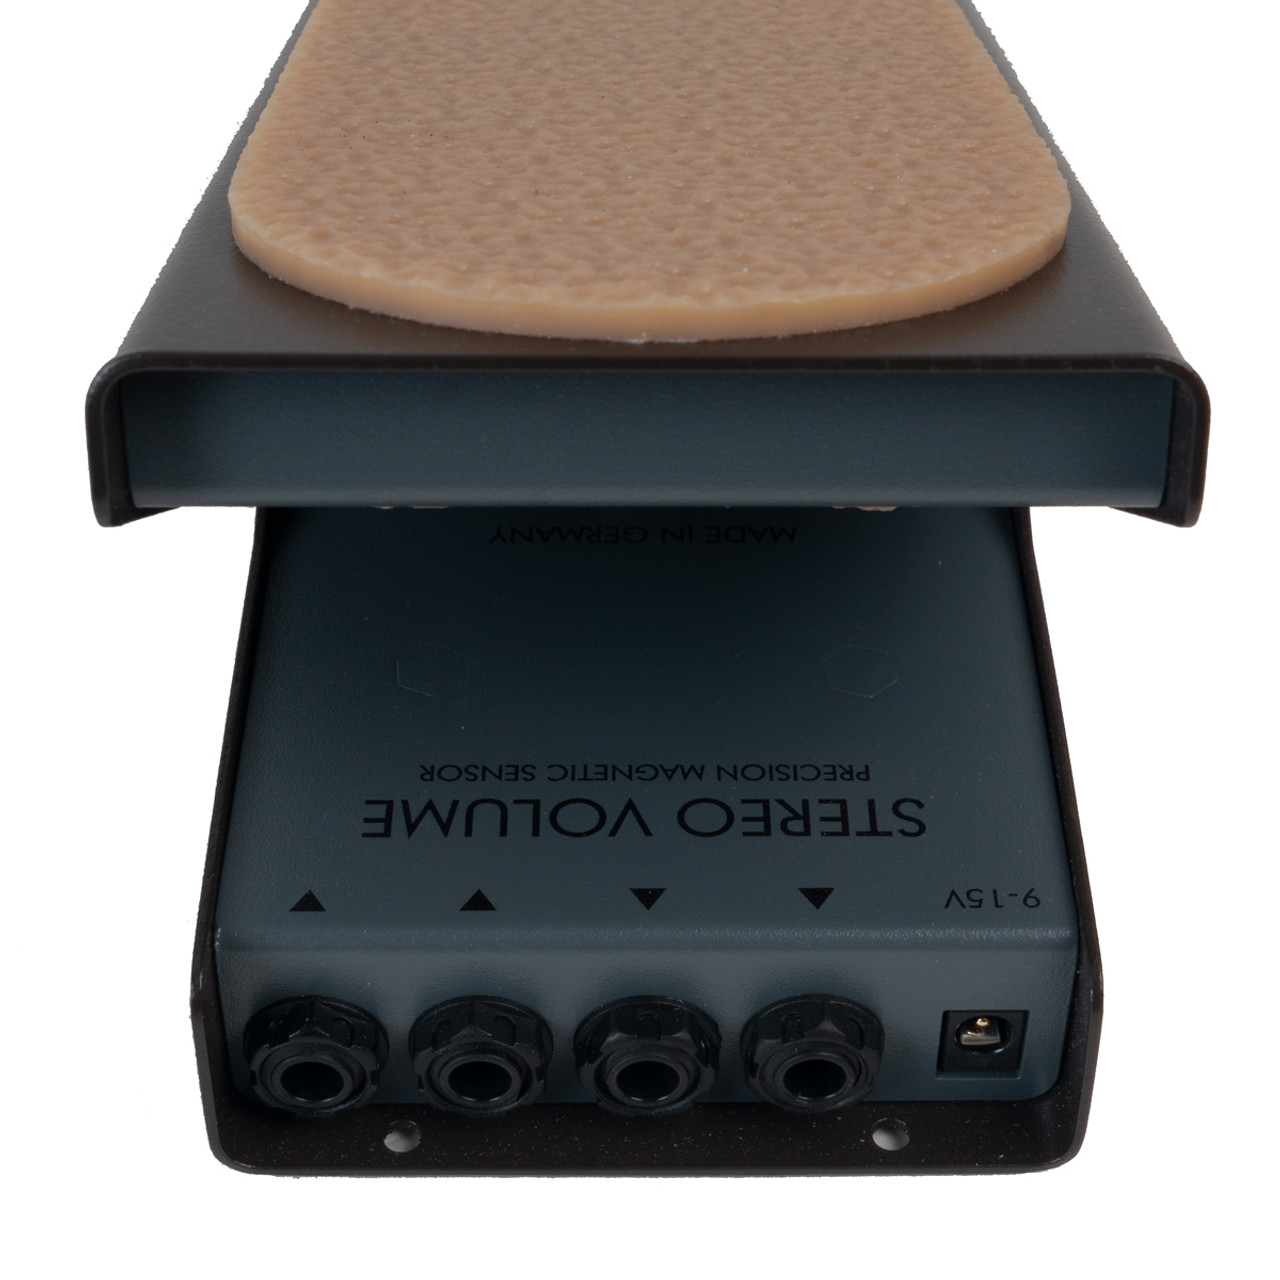 Lehle Active Stereo Volume Pedal